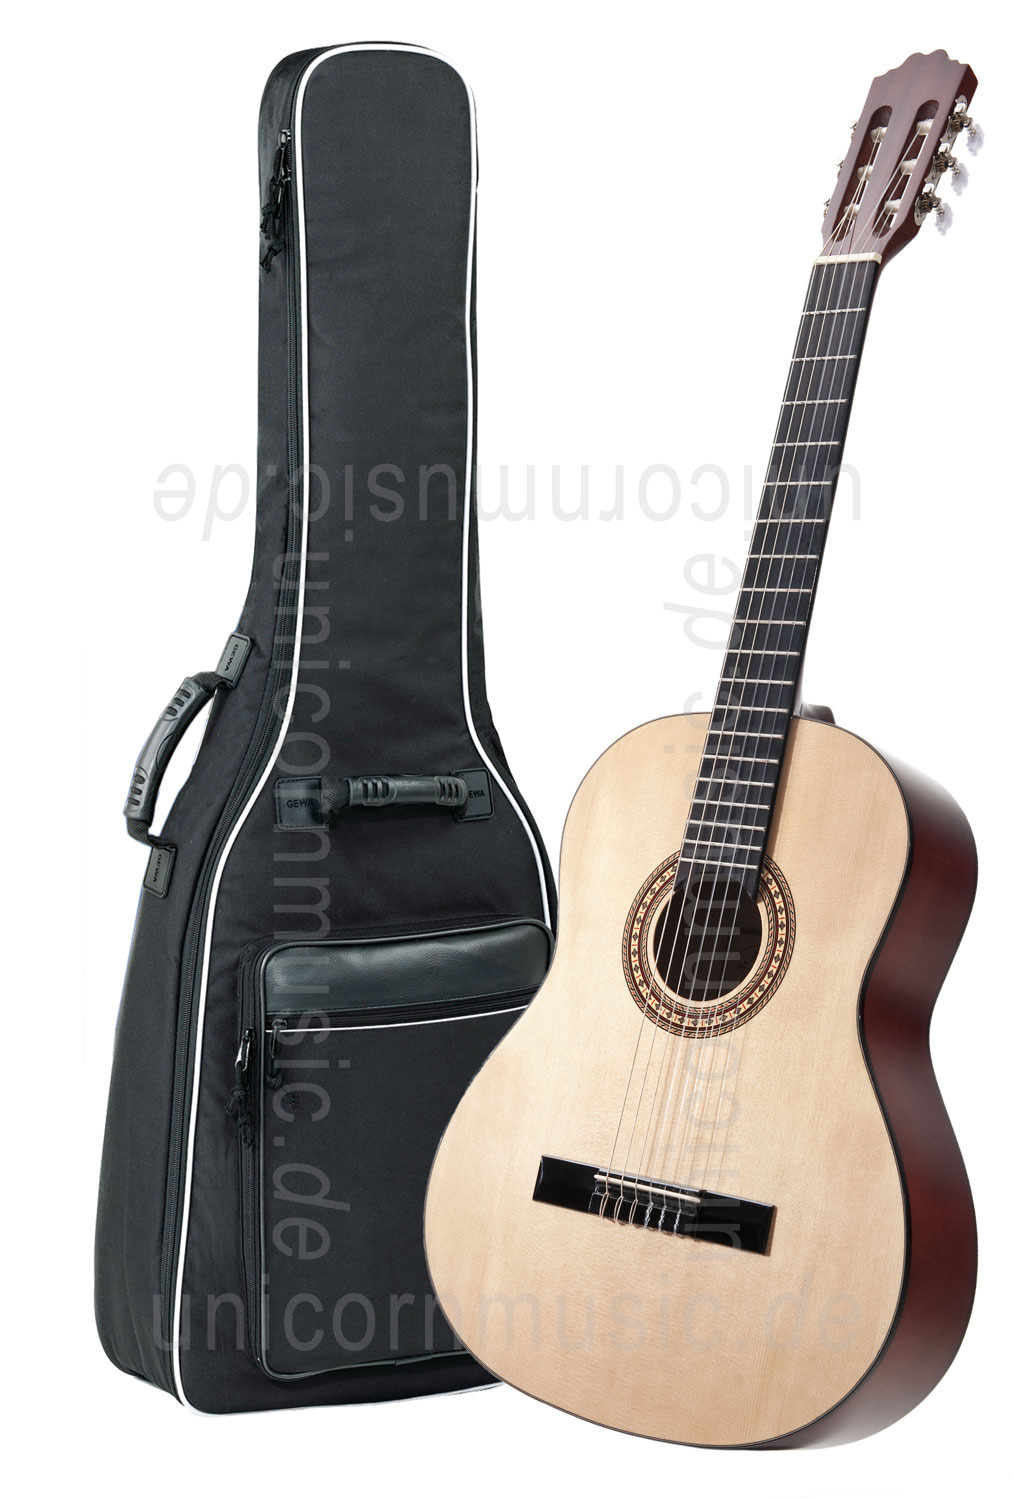 to article description / price Classical Guitar Beginners Set KIRKLAND - laminated spruce top - gigbag + stand + footstool